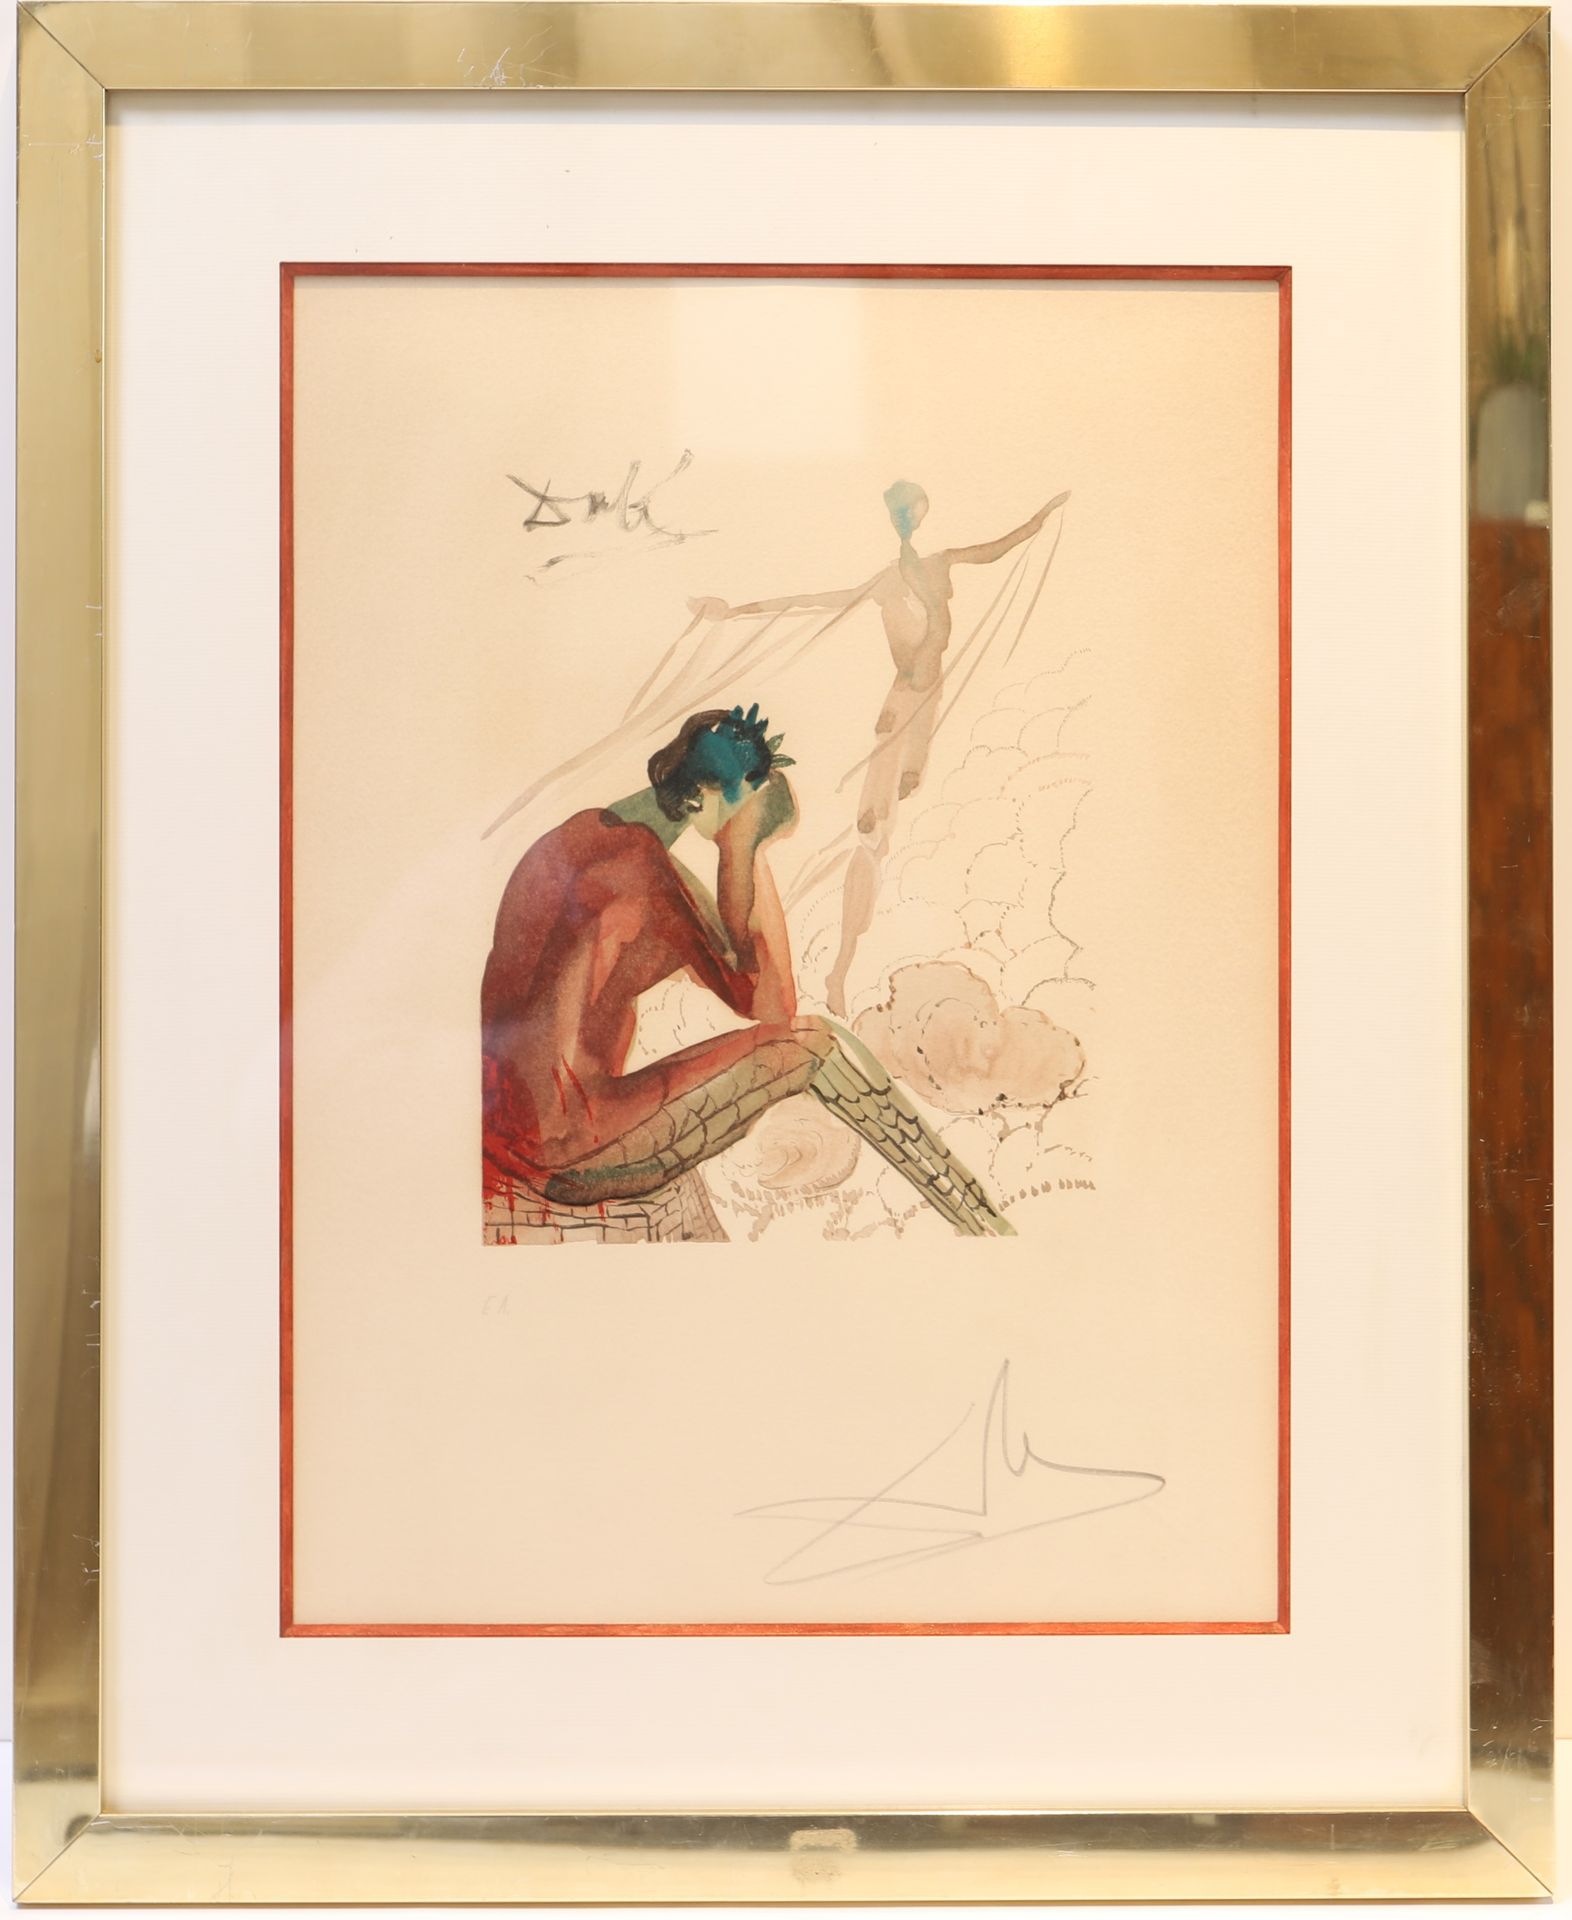 Null Salvador Dali (1904-1989)

Polychrome lithograph framed under glass.

EA, s&hellip;